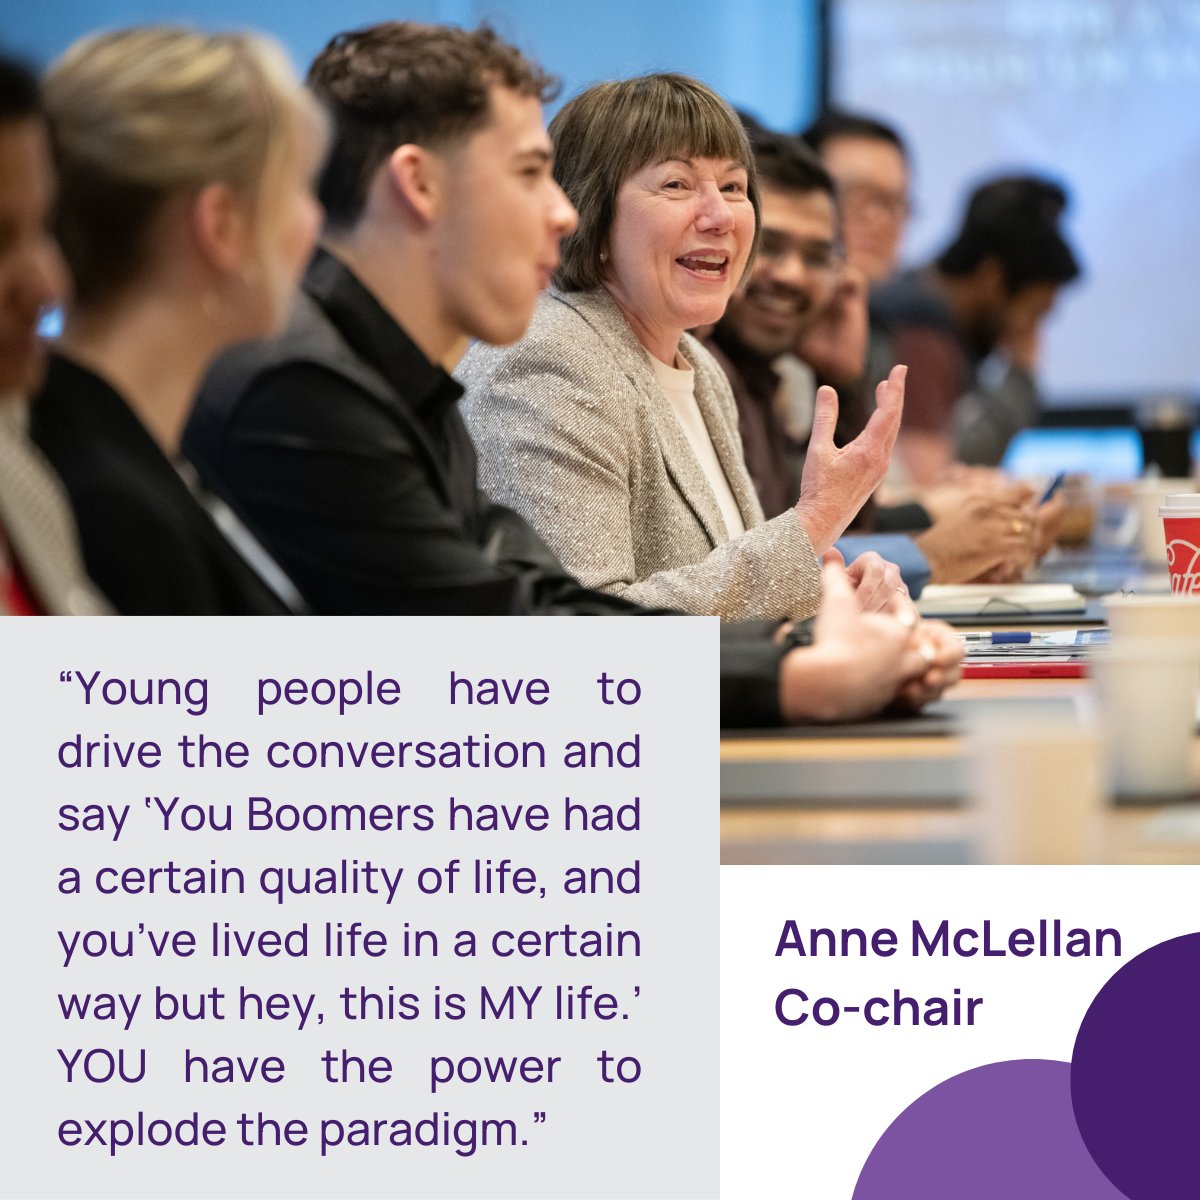 Young people have to drive the conversation on what economic growth means to them, says Coalition co-chair Anne McLellan. Tell us your story online: canadacoalition.ca/growthforall Or use the hashtag: #GrowthForAllCdns A better future can be built by our youth! #cdnpoli #cdnecon